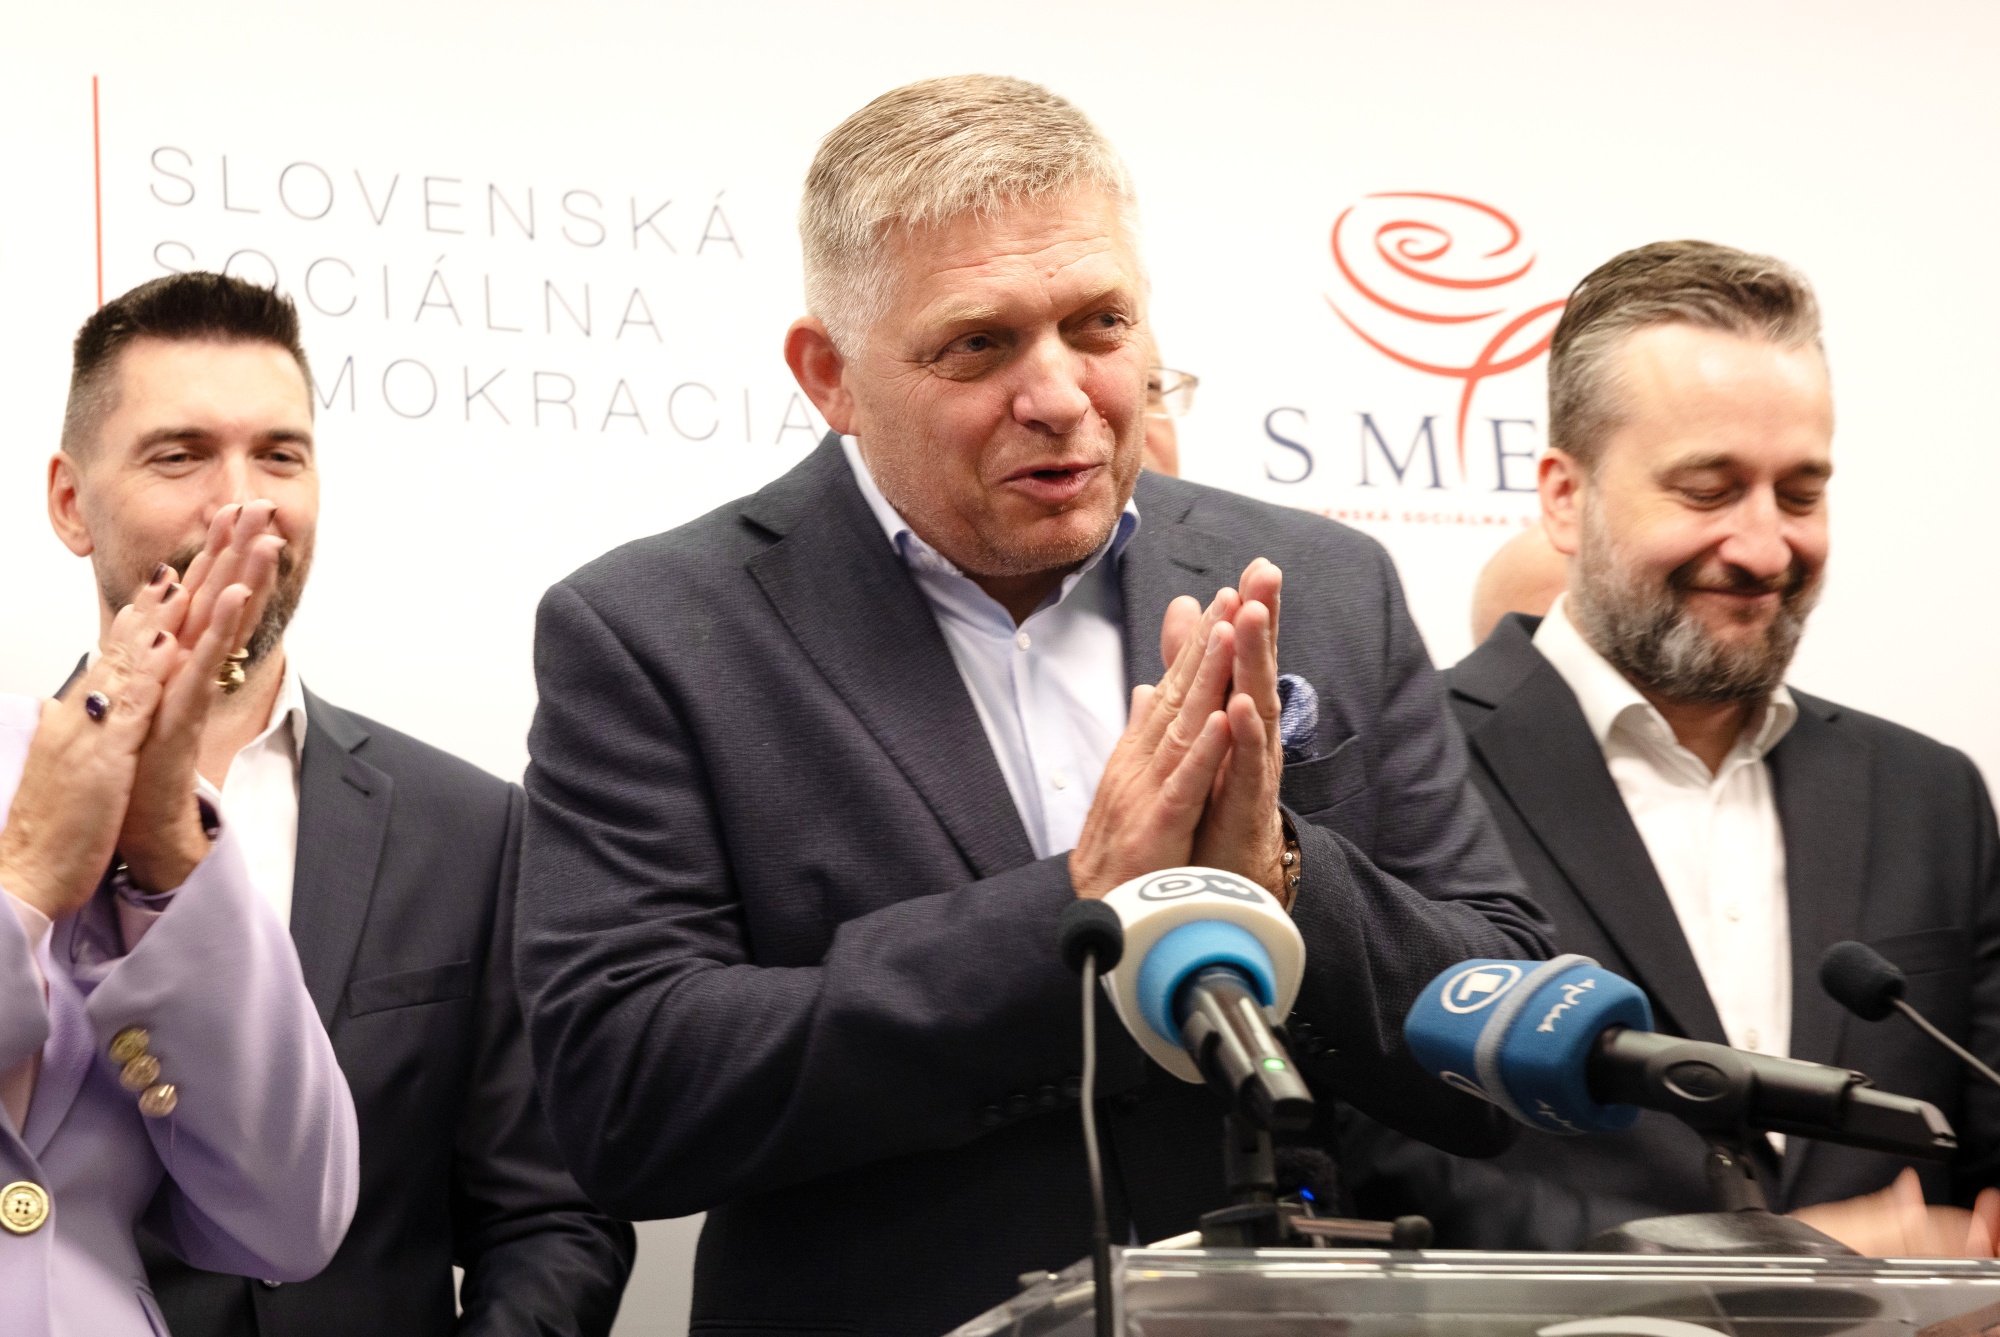 Russia-Ukraine: Fico to Be Slovakia PM as Coalition Sealed - Bloomberg